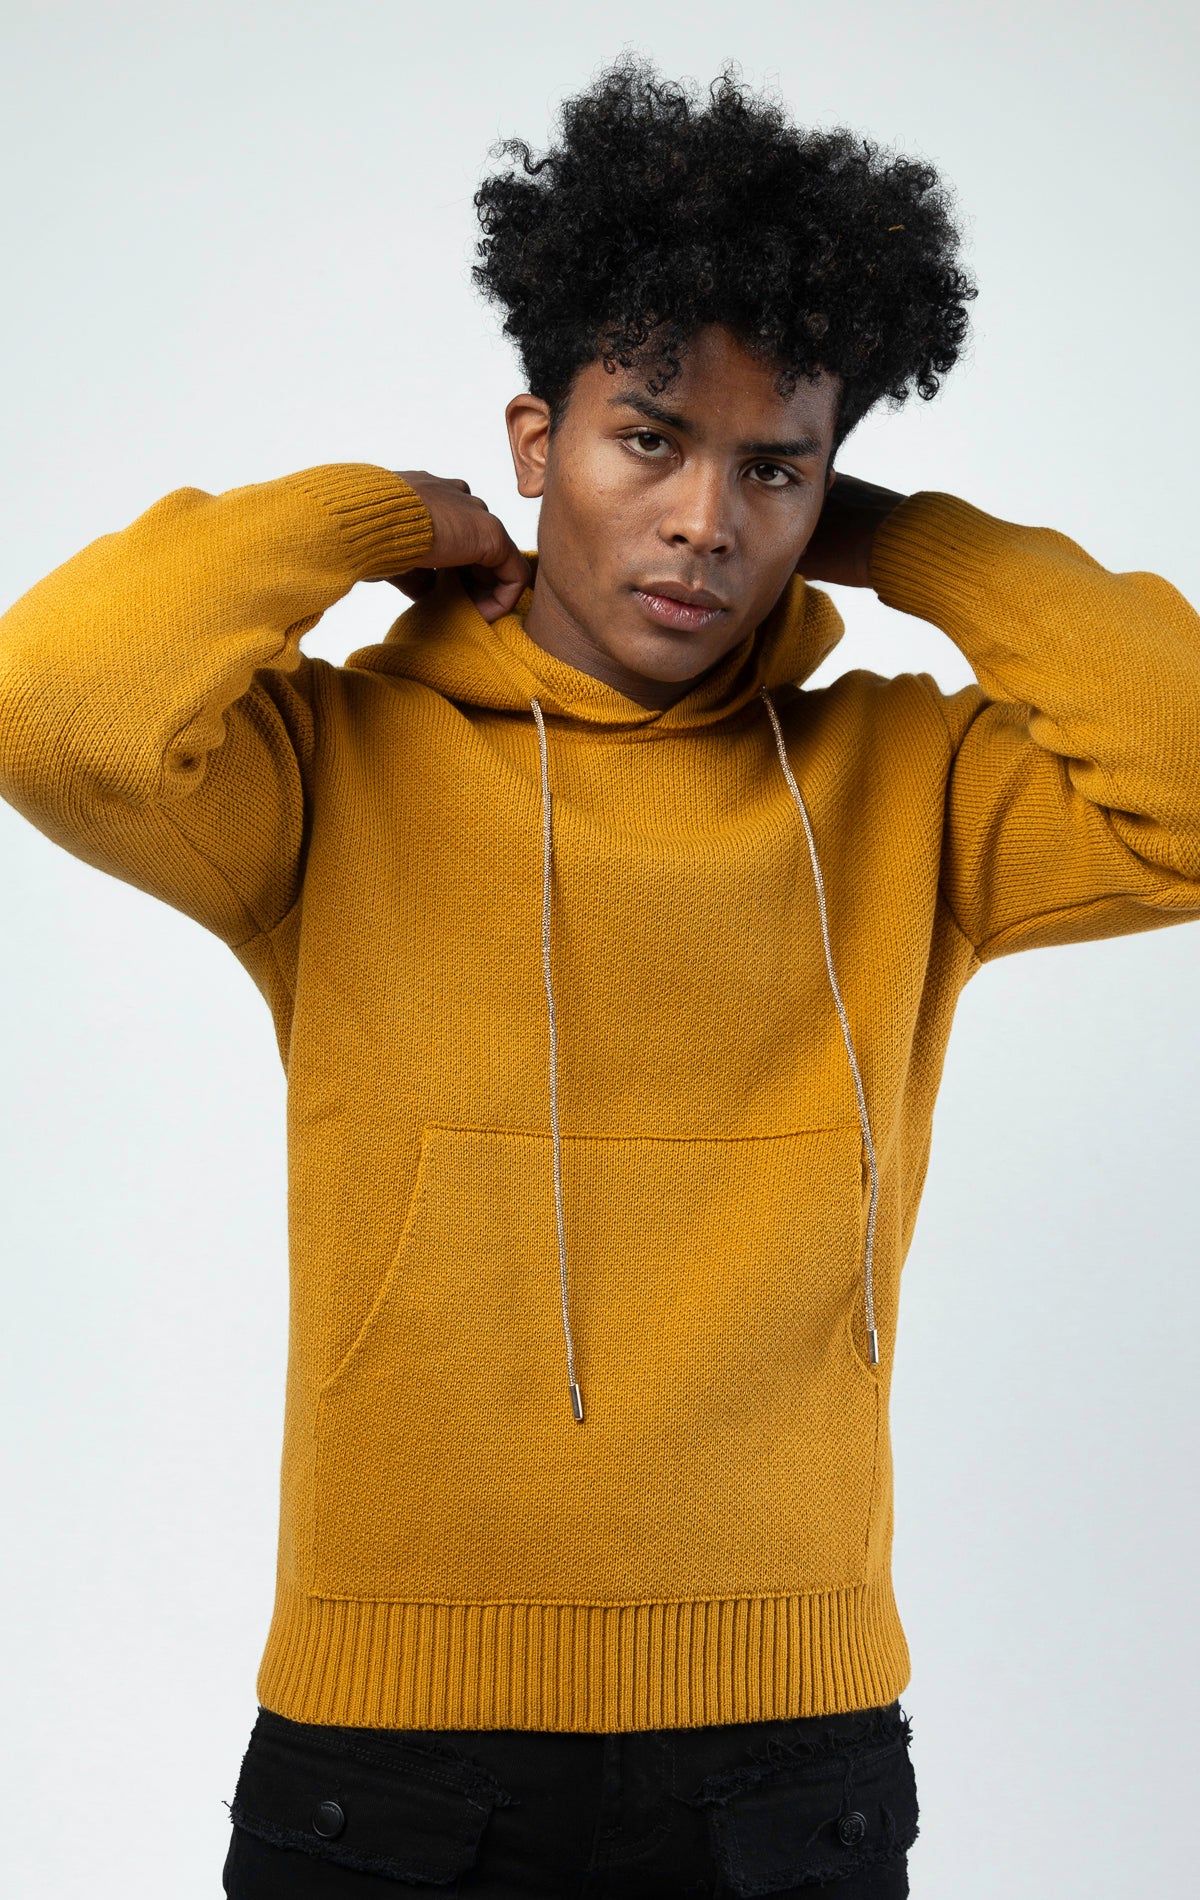 Wheat Luxury sweater hoodie with crystal strings in wheat and black color.